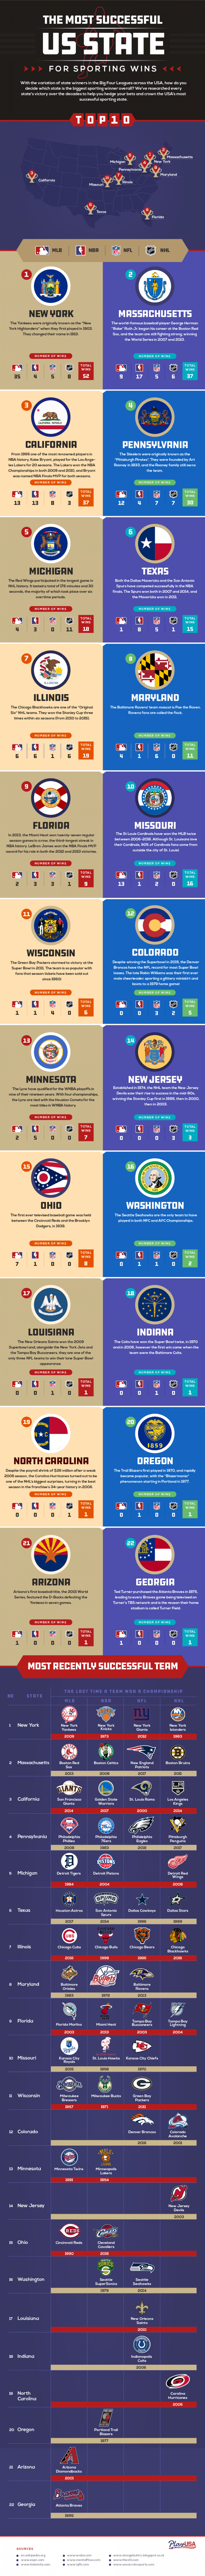 Most Successful US States in Sports